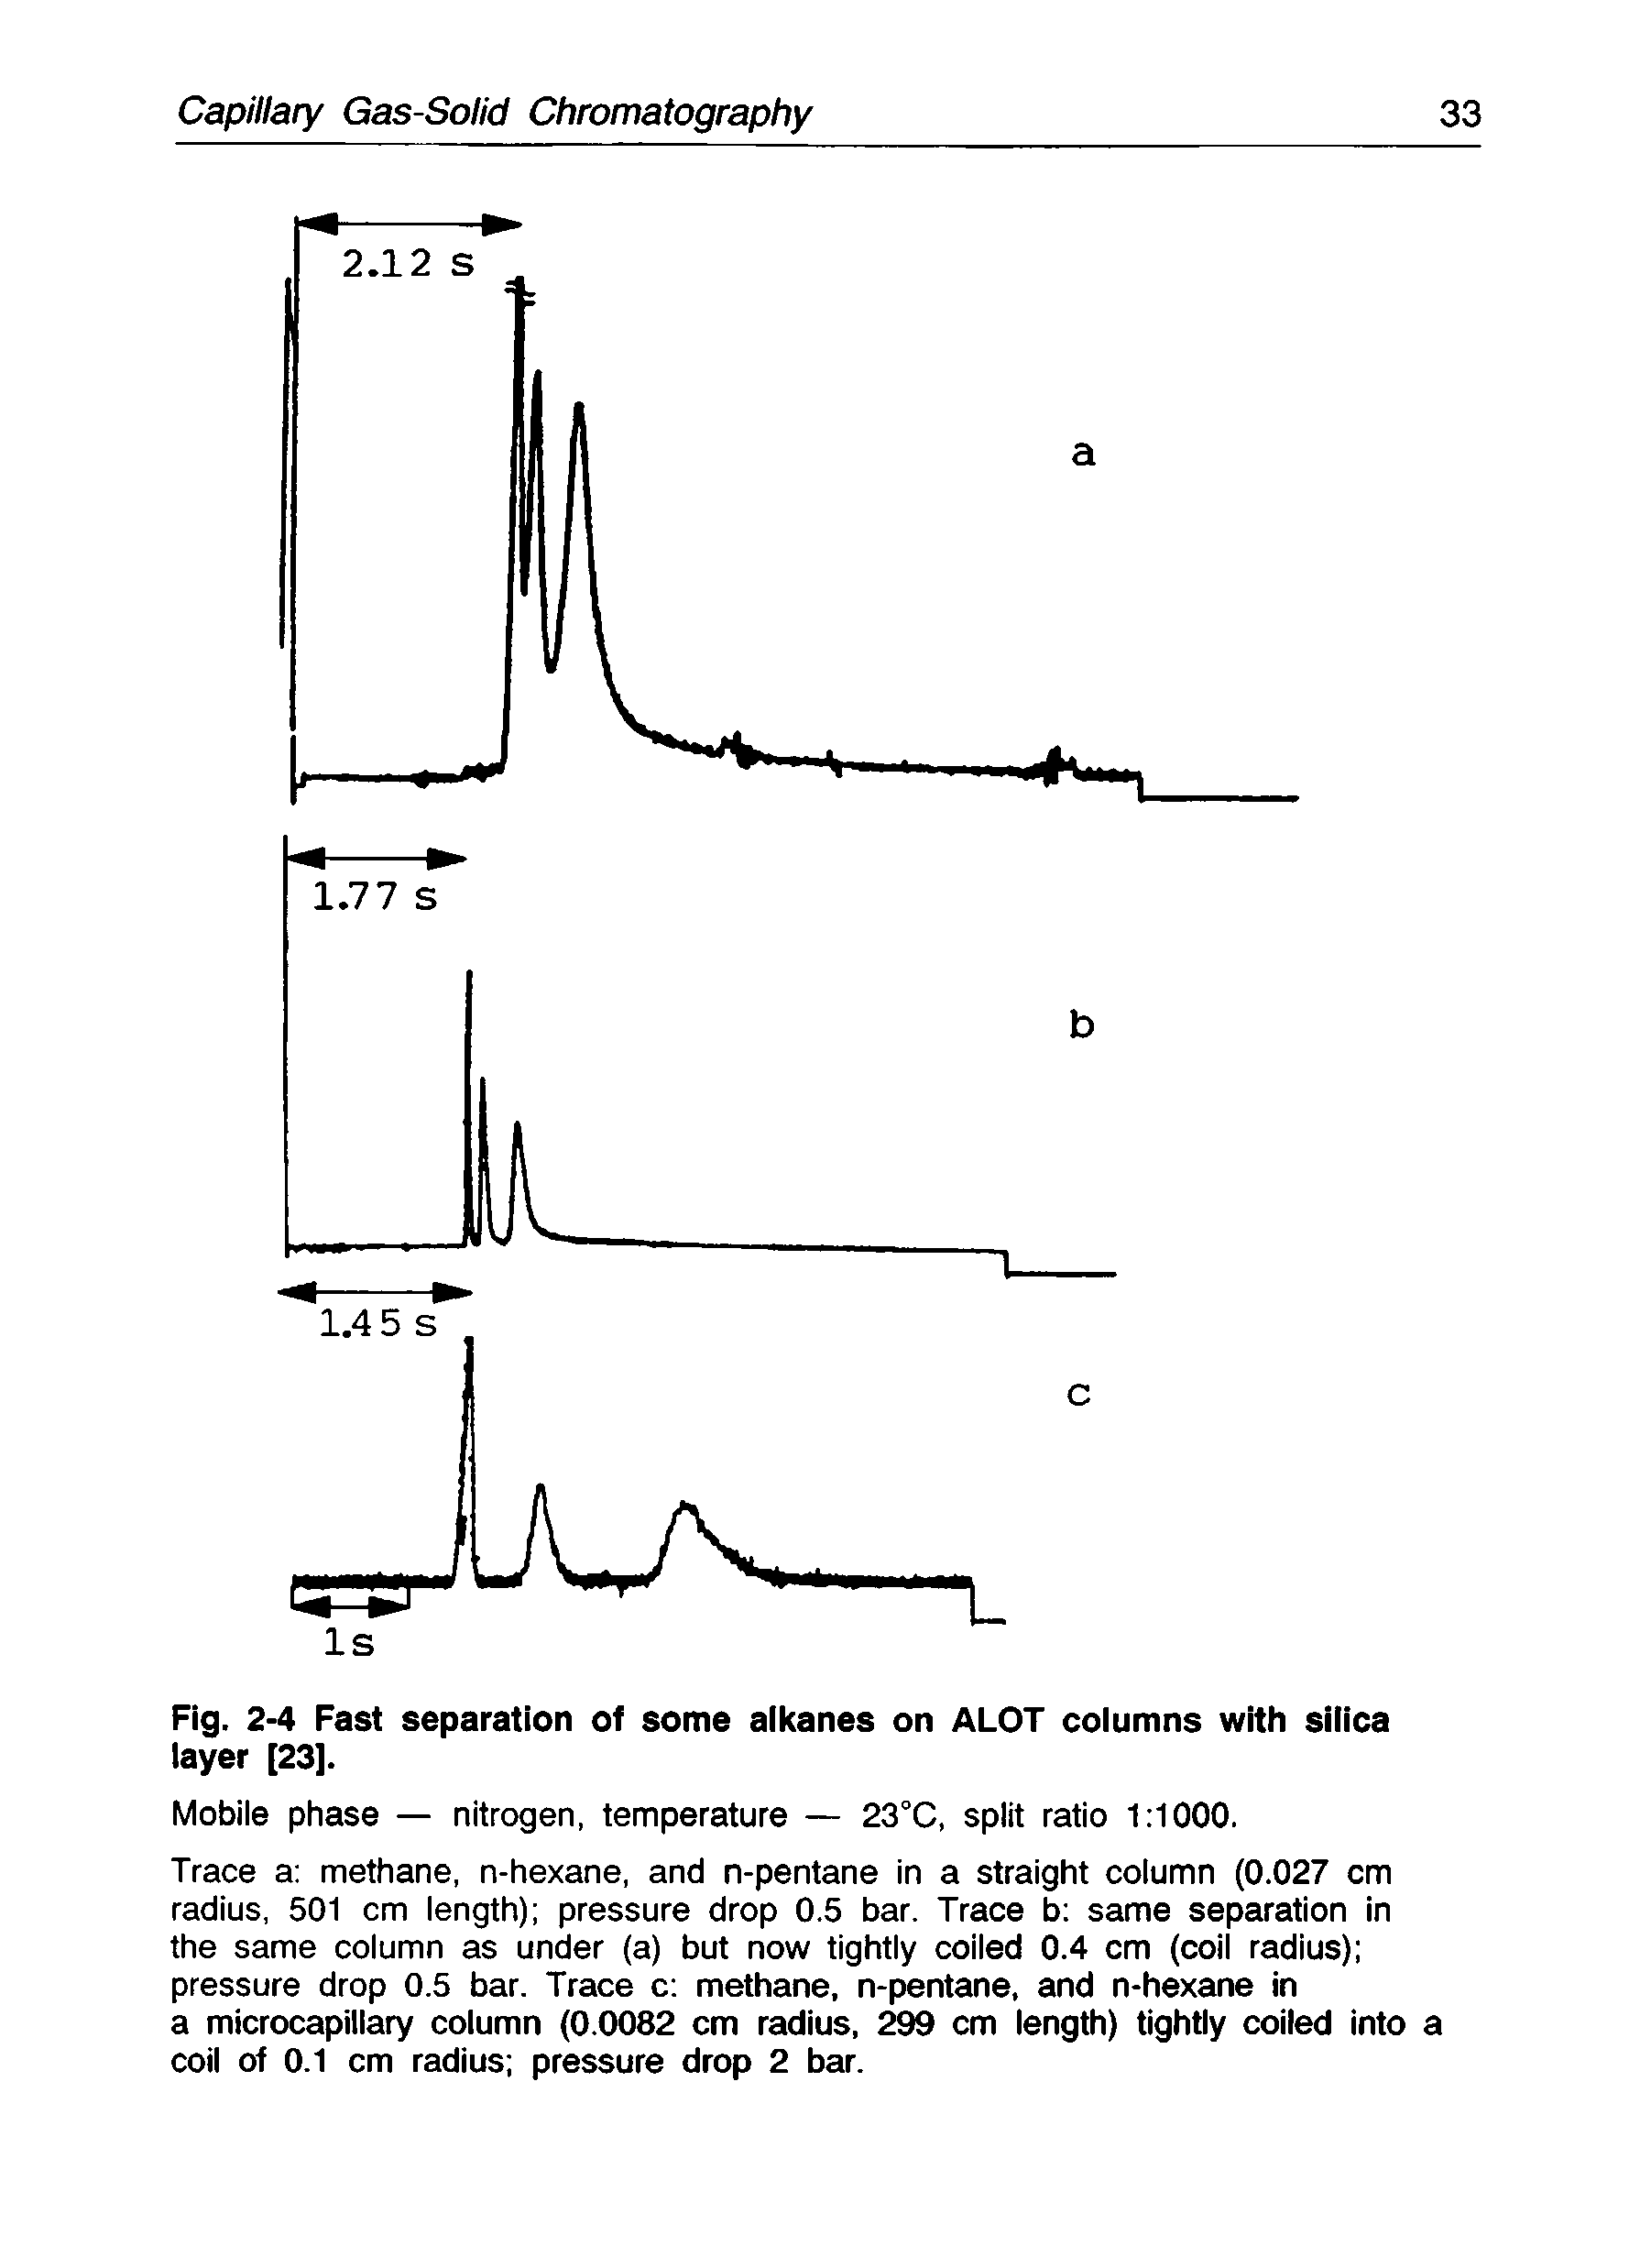 Fig. 2-4 Fast separation of some alkanes on ALOT columns with silica layer [23].